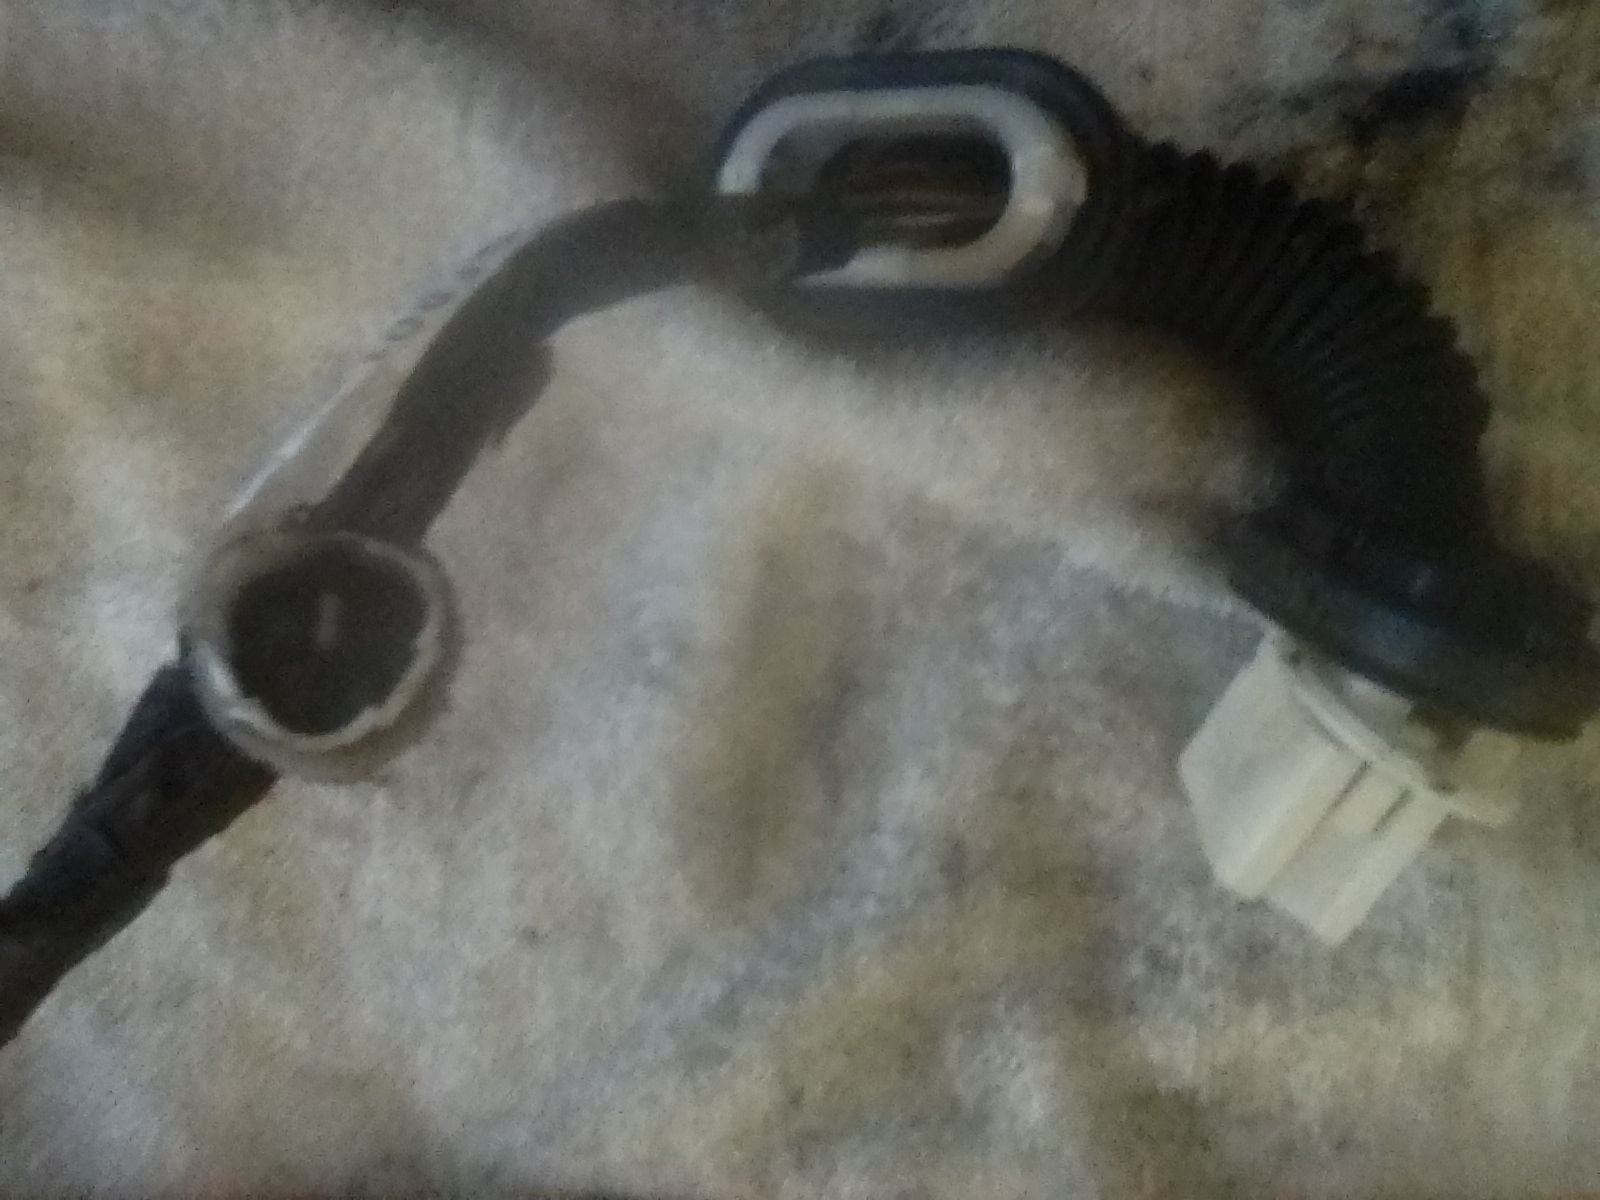 Miscellaneous - FD - OEM Front Door Harness - Used - 1993 to 1995 Mazda RX-7 - San Jose, CA 95132, United States